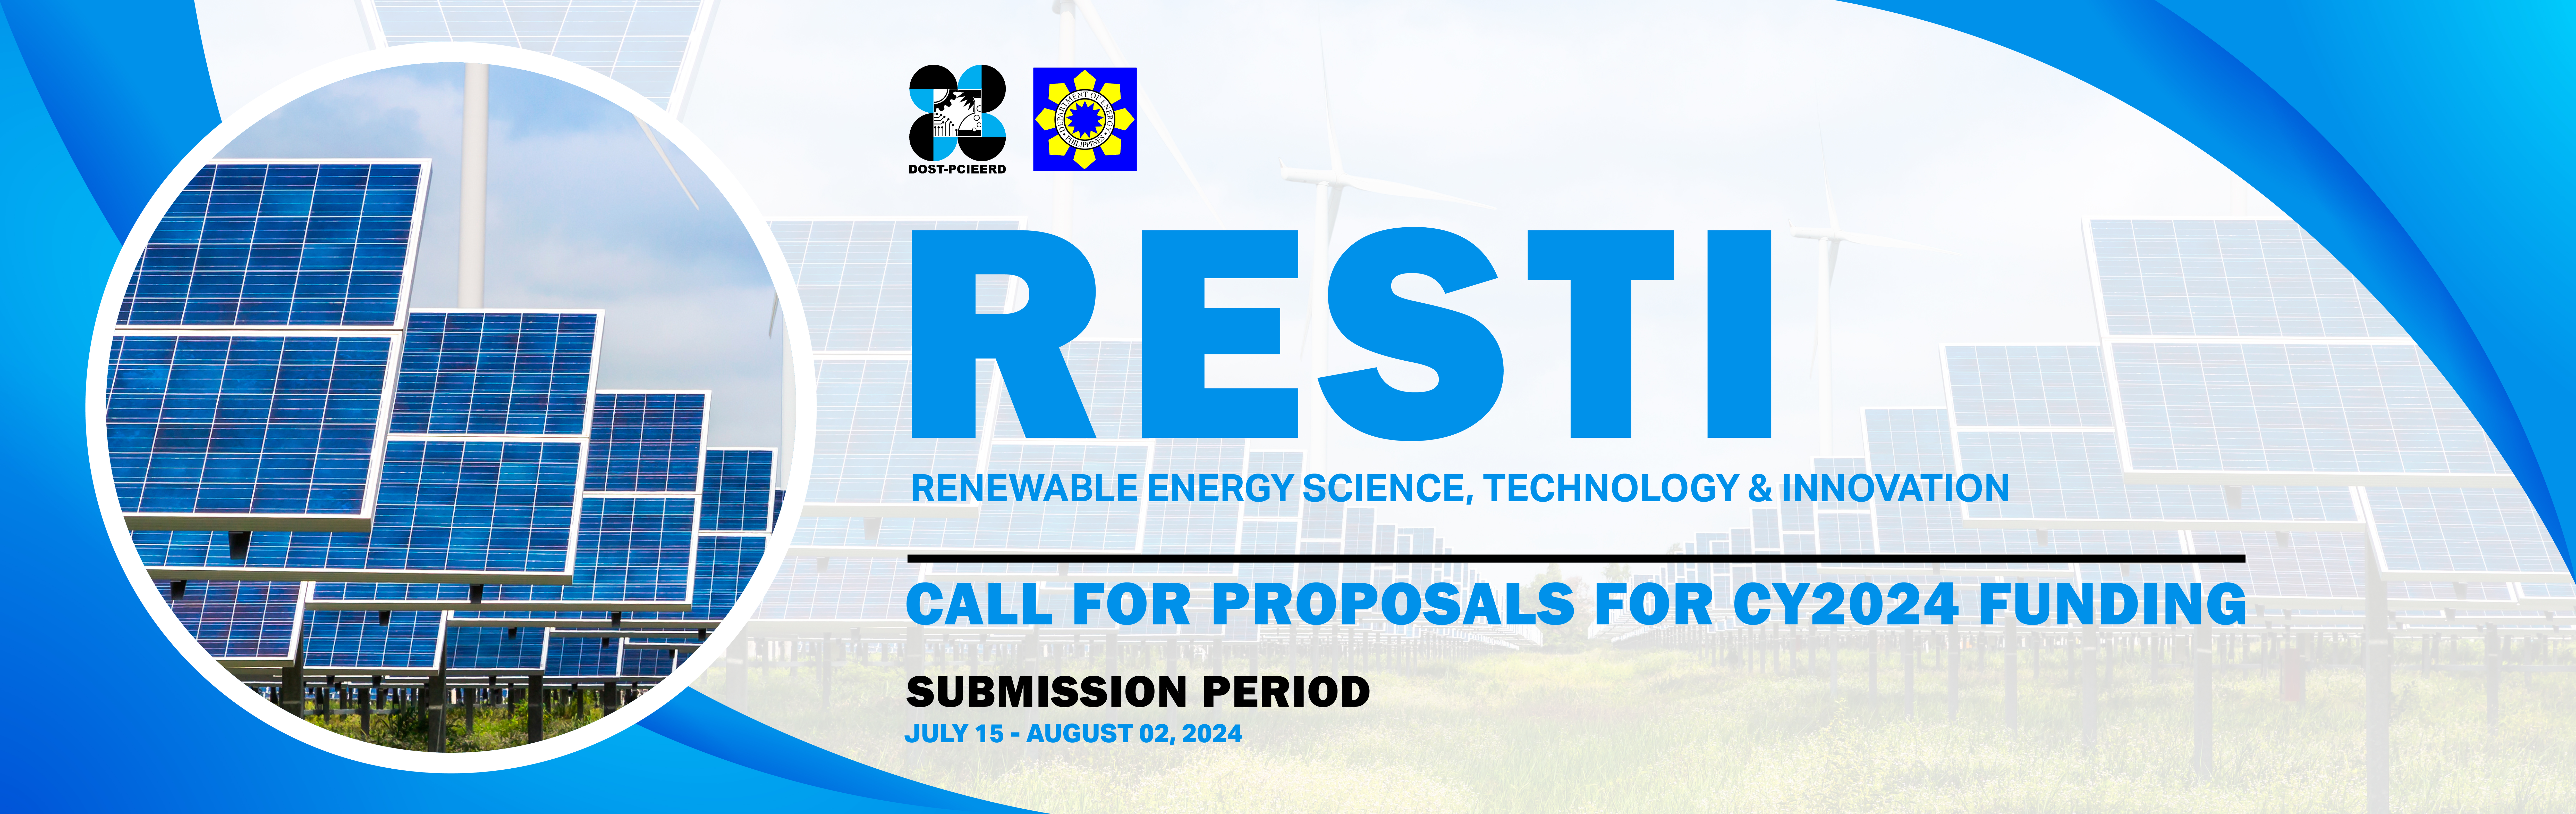 CALL FOR PROPOSALS FOR THE DOE & DOST-PCIEERD RENEWABLE ENERGY SCIENCE, TECHNOLOGY & INNOVATION (RESTI) - FOR CY2024 FUNDING